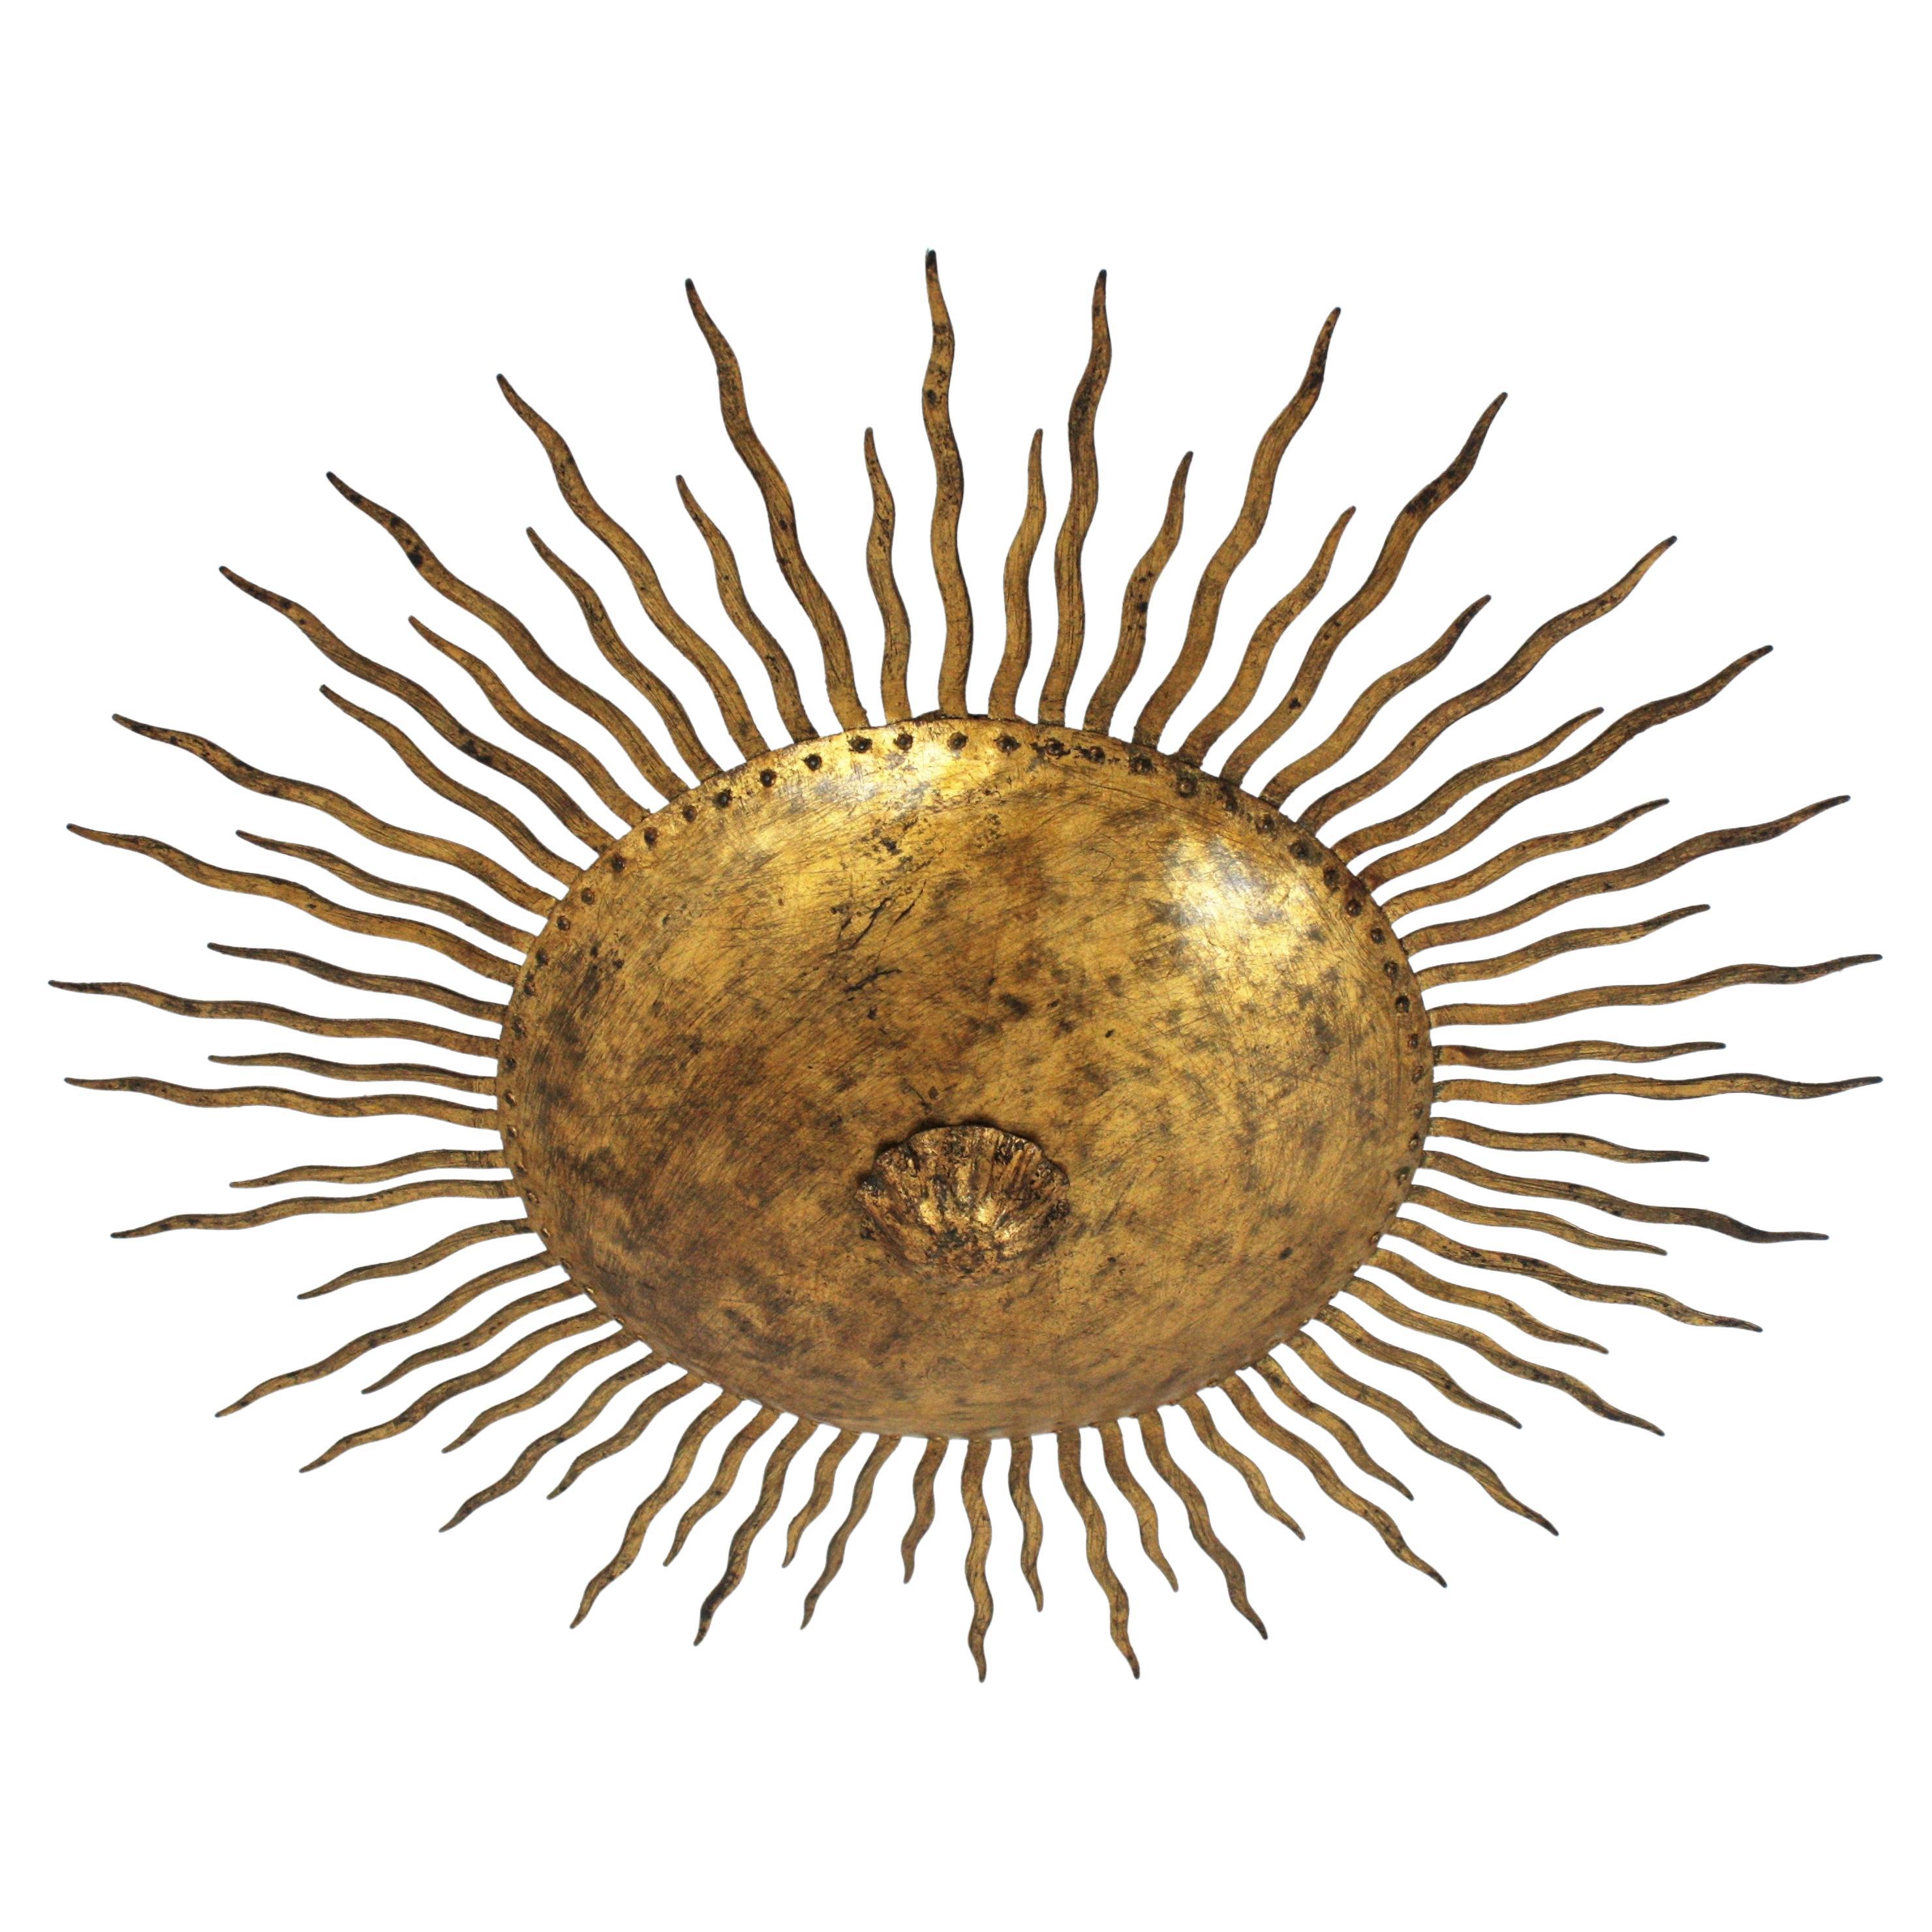 French large wrought gilt hand forged iron sunburst flush mount / ceiling light fixture. France, 1950s.
This hand-hammered iron flushmount has alternating rays in two sizes surrounding the central sphere and a flower decoration at the central part.